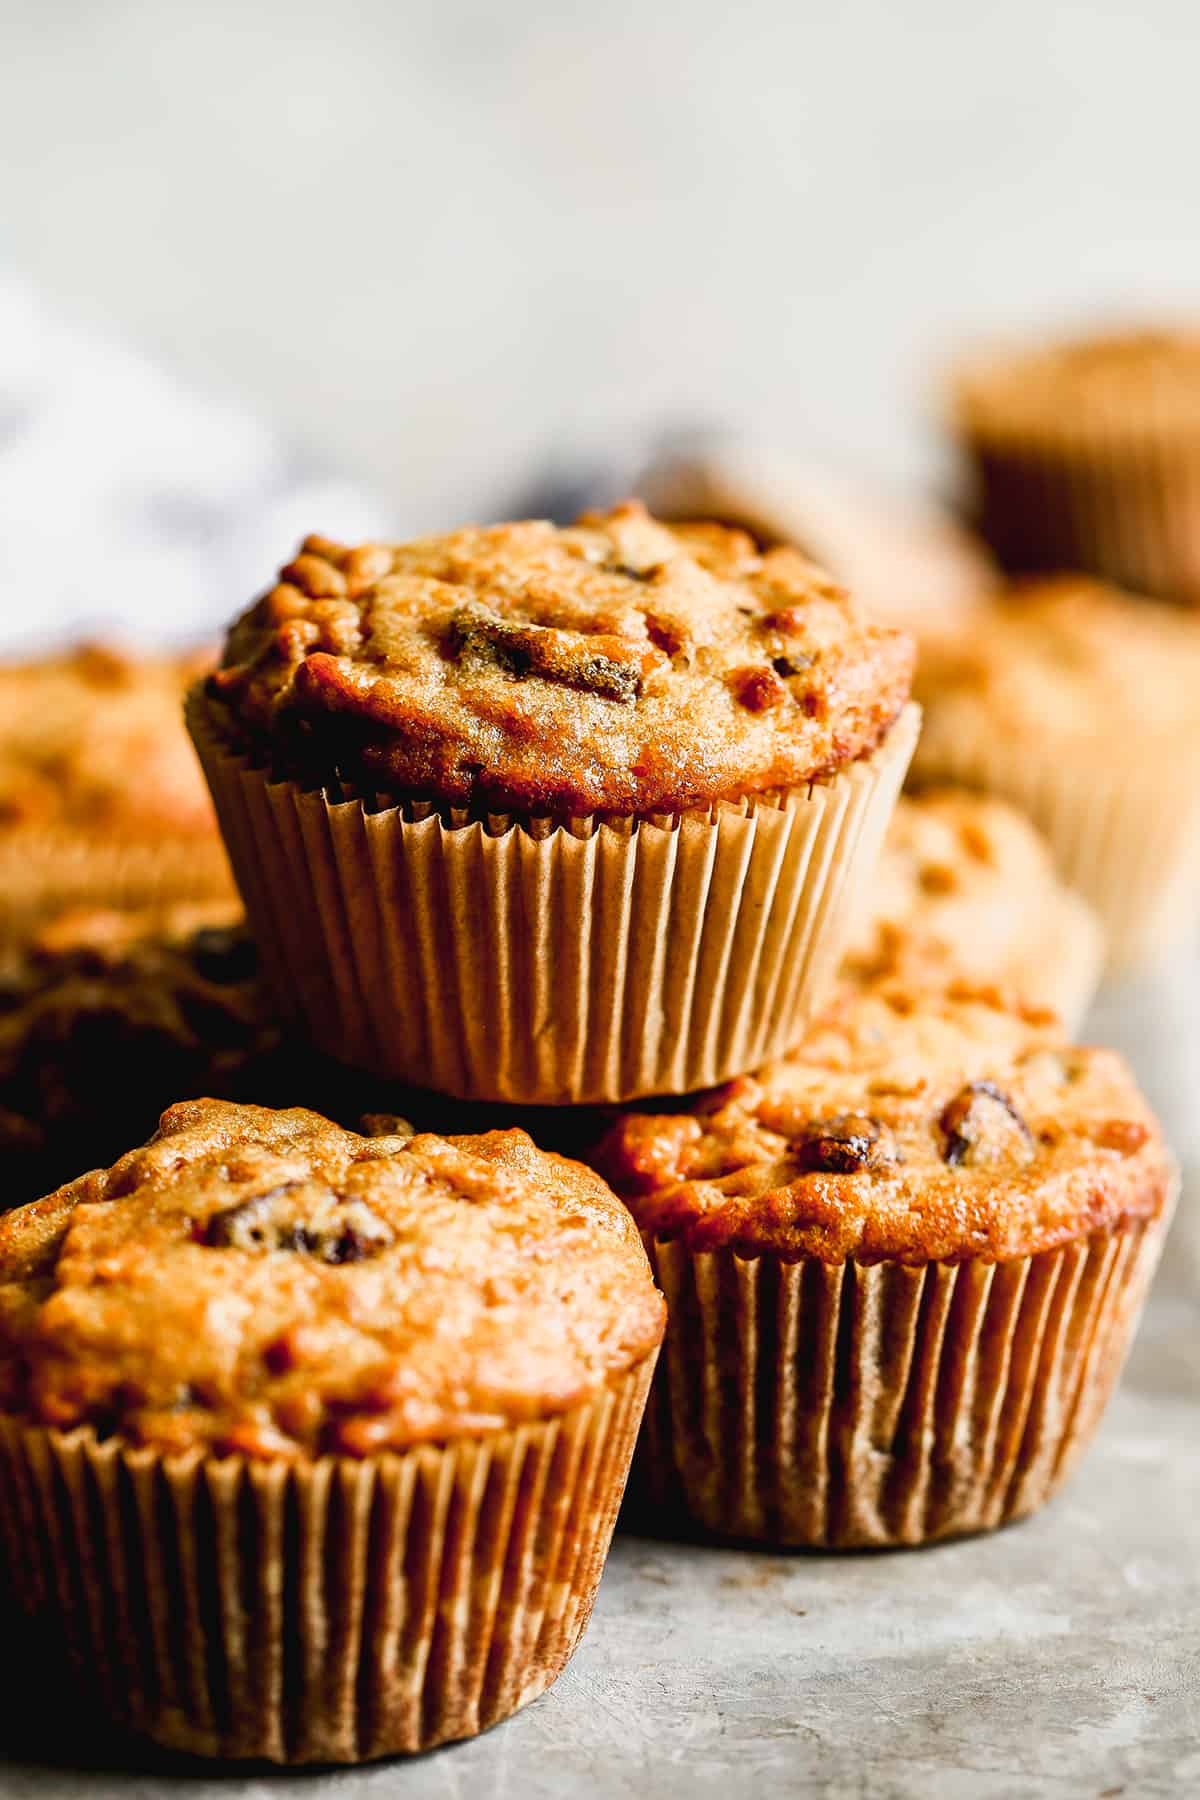 Bran Muffins baked in muffin liners and stacked on top of each other.